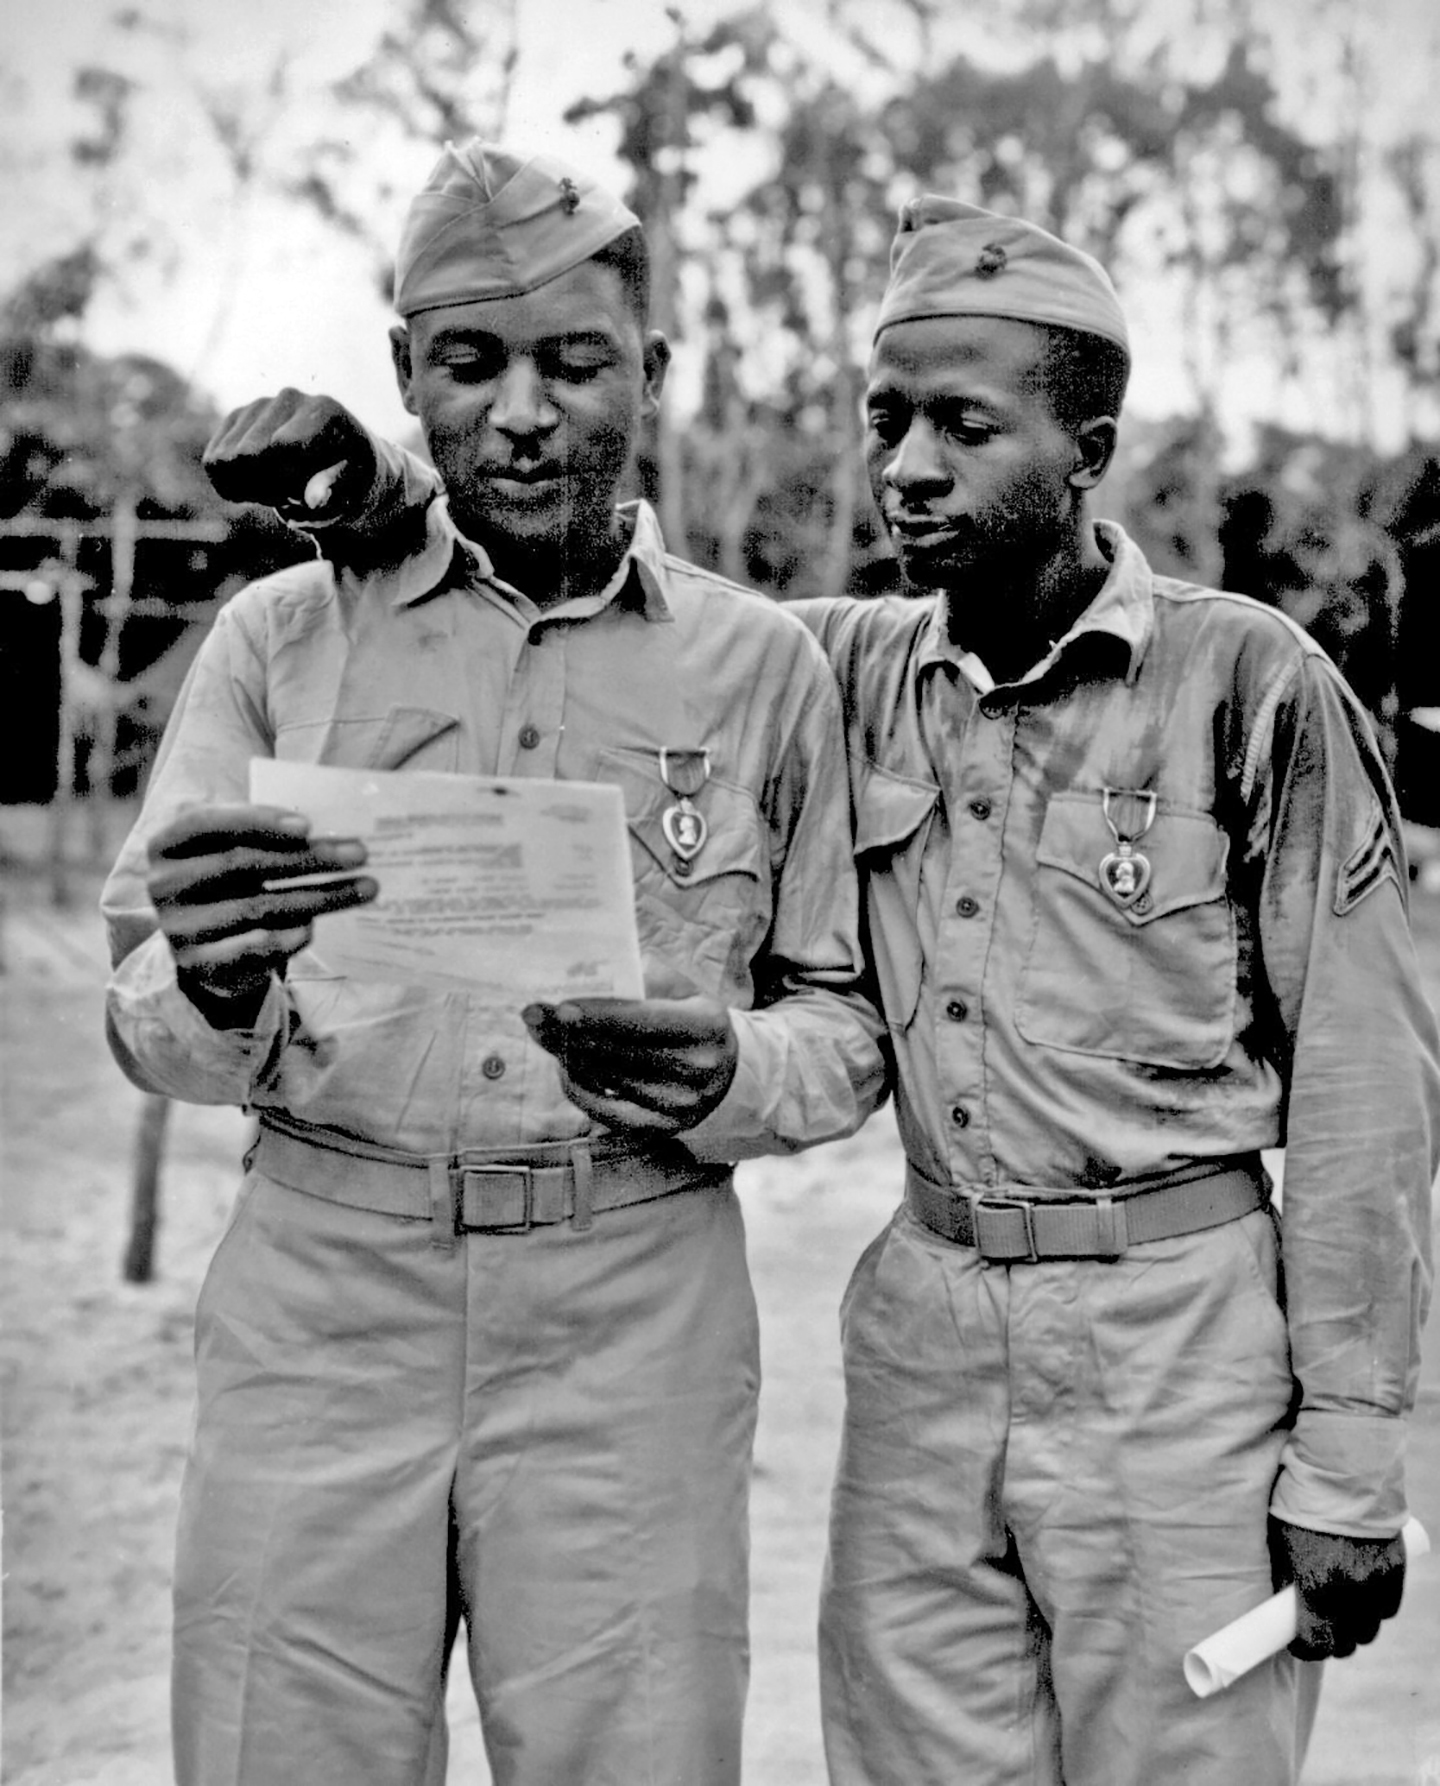 PHOTO: The Montford Point Marines unit was twenty thousand strong, but the U.S. military failed to keep records for all but 2000 of them.